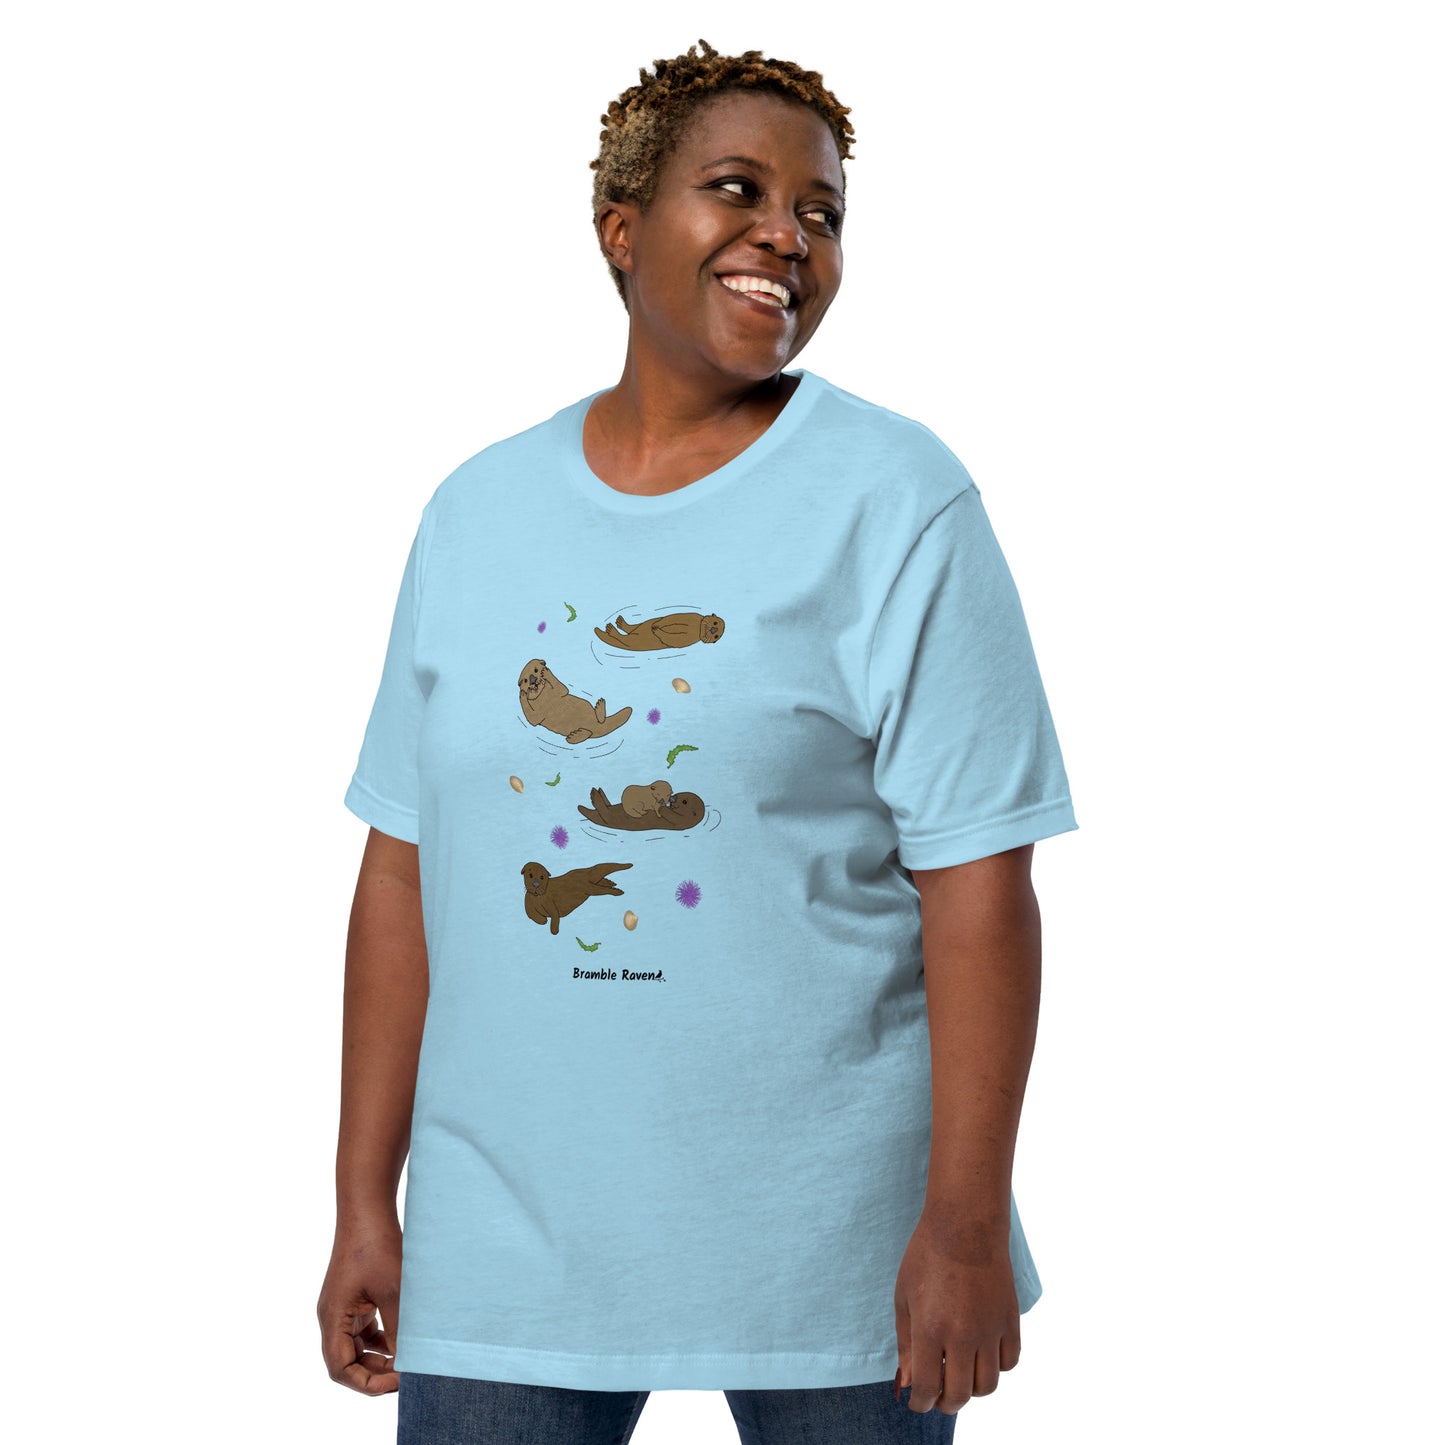 Unisex ocean blue colored t-shirt. Features four sea otters with seaweed, shells, and sea urchins. Shown on female model looking right.